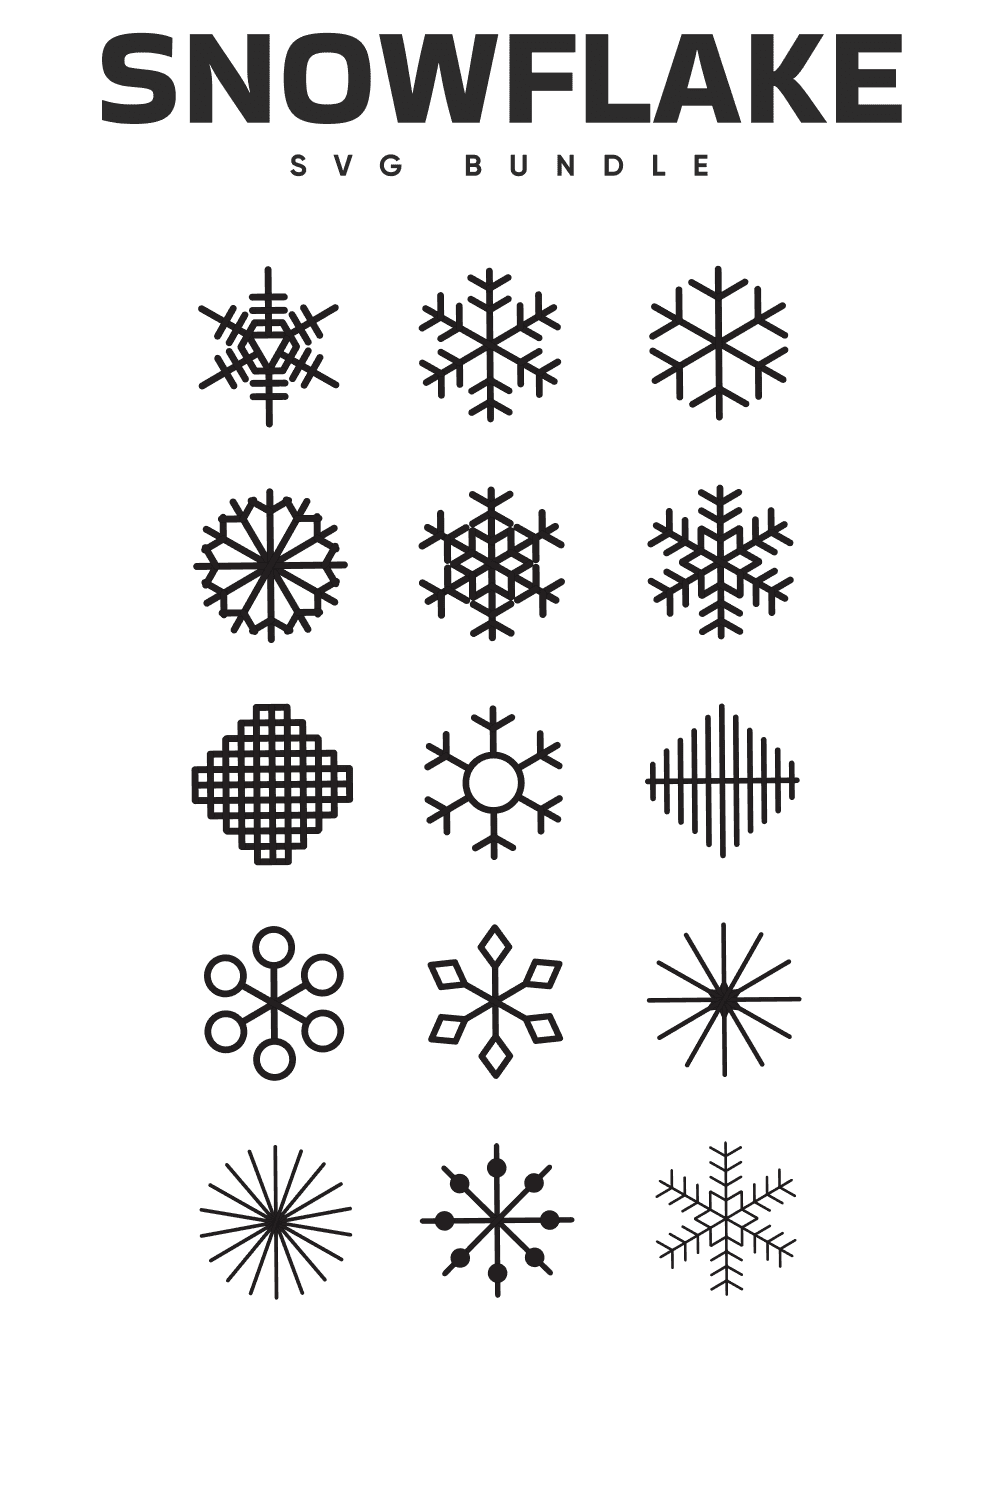 Snowflake SVG Free - pinterest image preview.